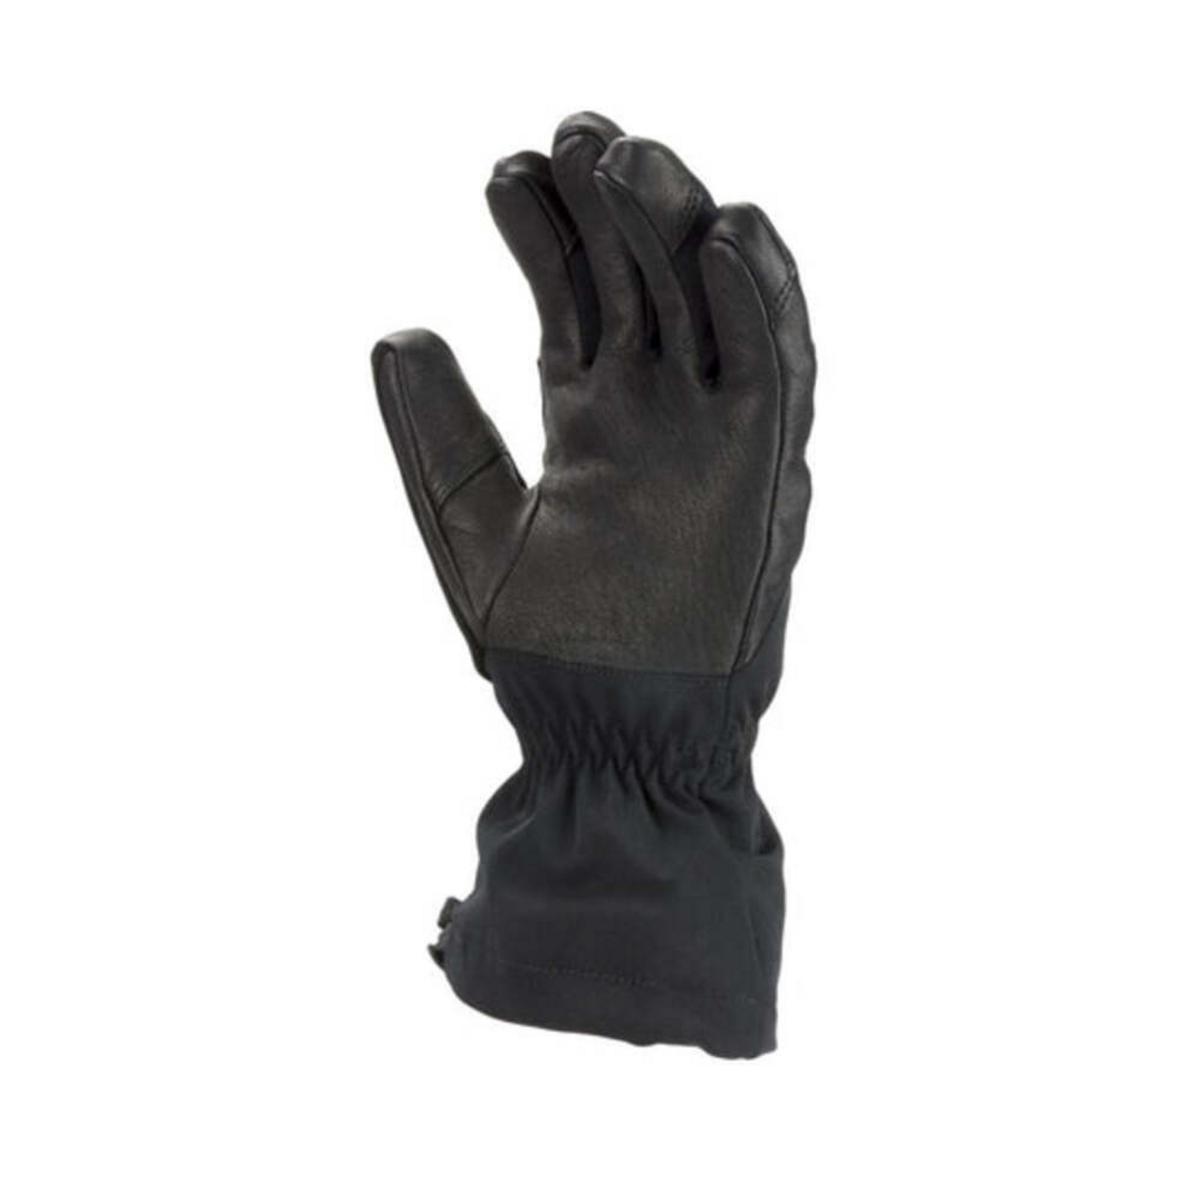 SealSkinz Southery Waterproof Extreme Cold Weather Gauntlet